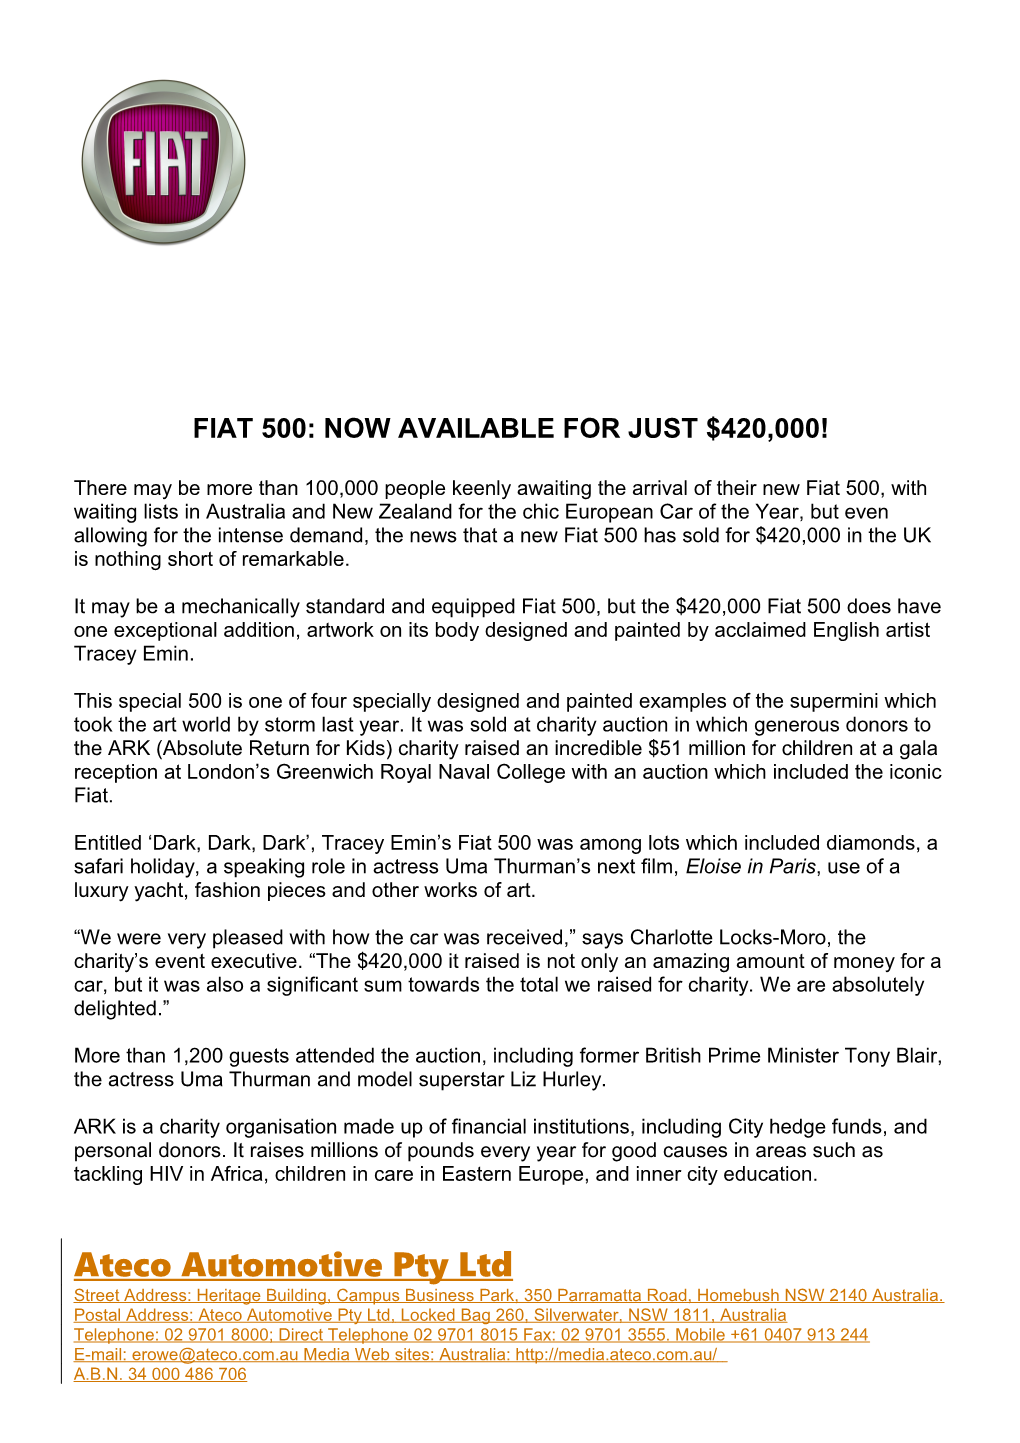 Fiat 500: Now Available for Just $420,000!